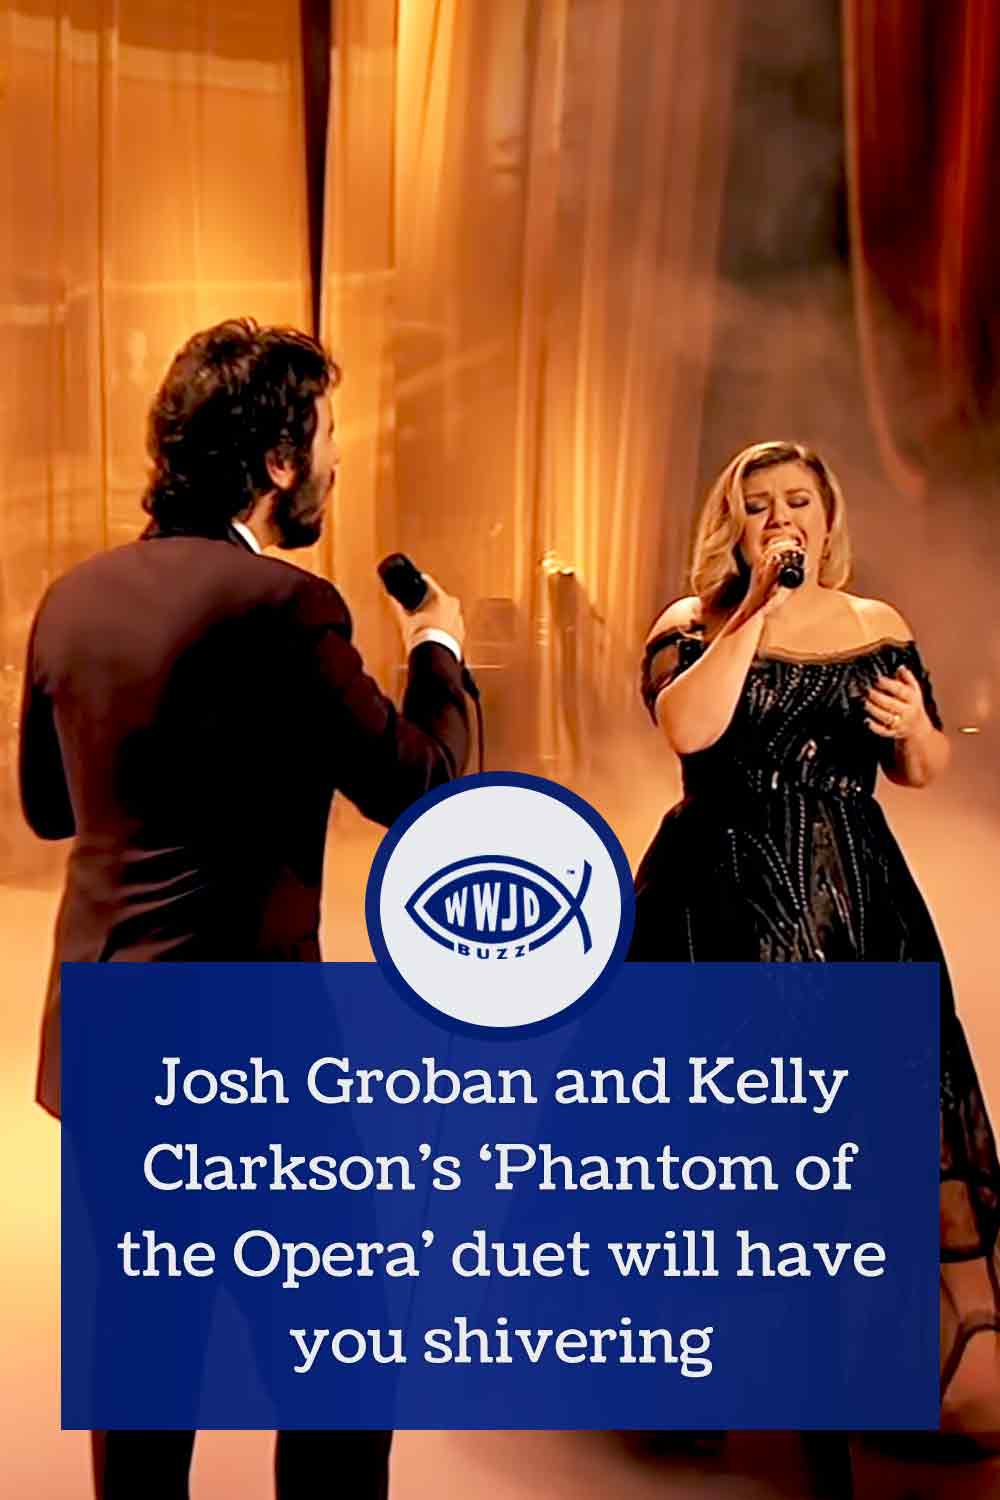 Josh Groban and Kelly Clarkson’s \'Phantom of the Opera\' duet will have you shivering